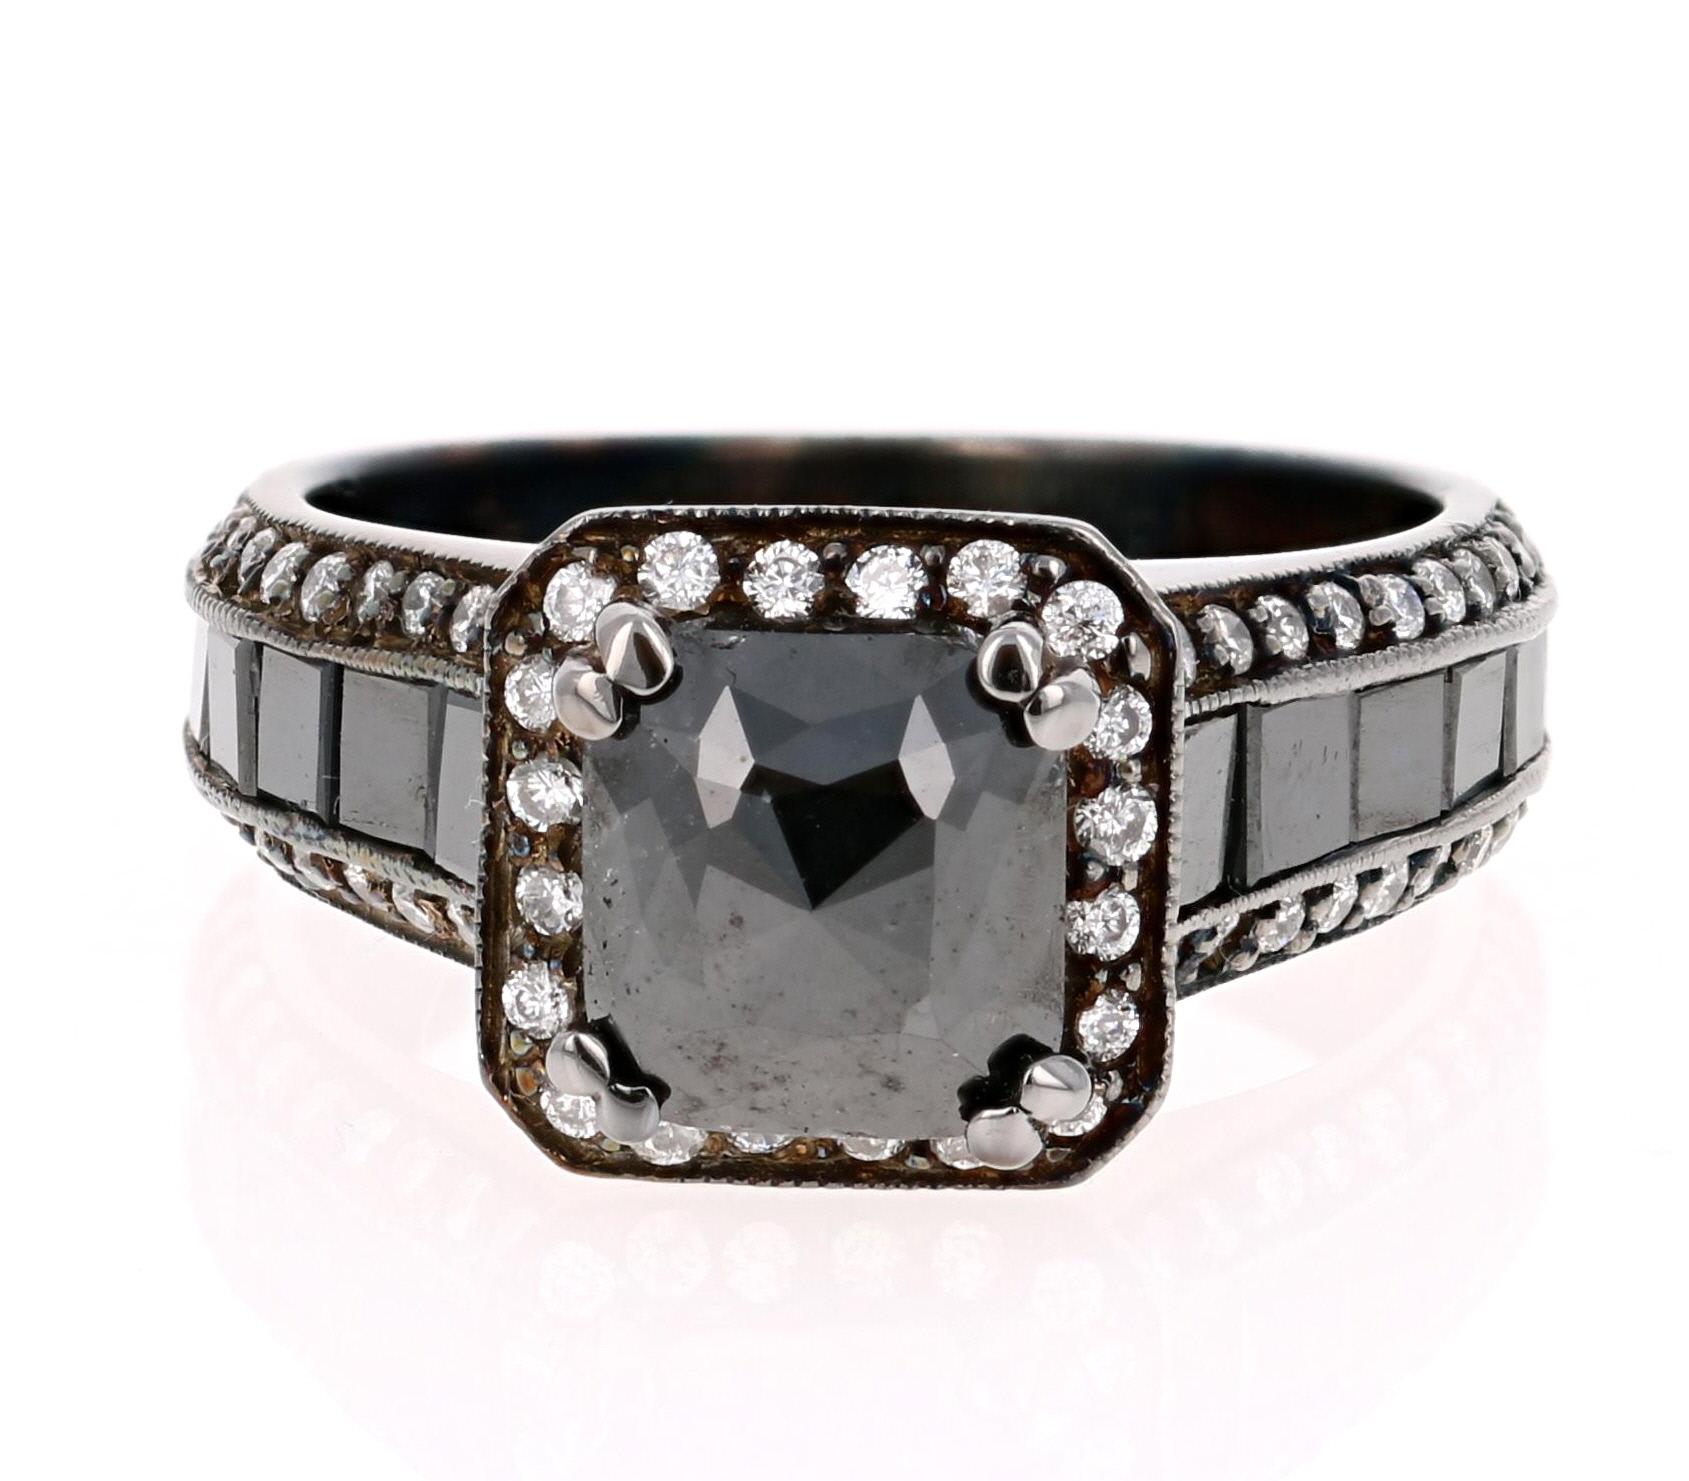 Truly a unique piece!!  A Black and White Diamond Ring in a Black Rhodium finish for a Vintage-Inspired look. This ring has a 1.50 carat Black Diamond in the center of the ring which is surrounded by 72 Round Cut Diamonds that weigh 0.44 Carats.  On